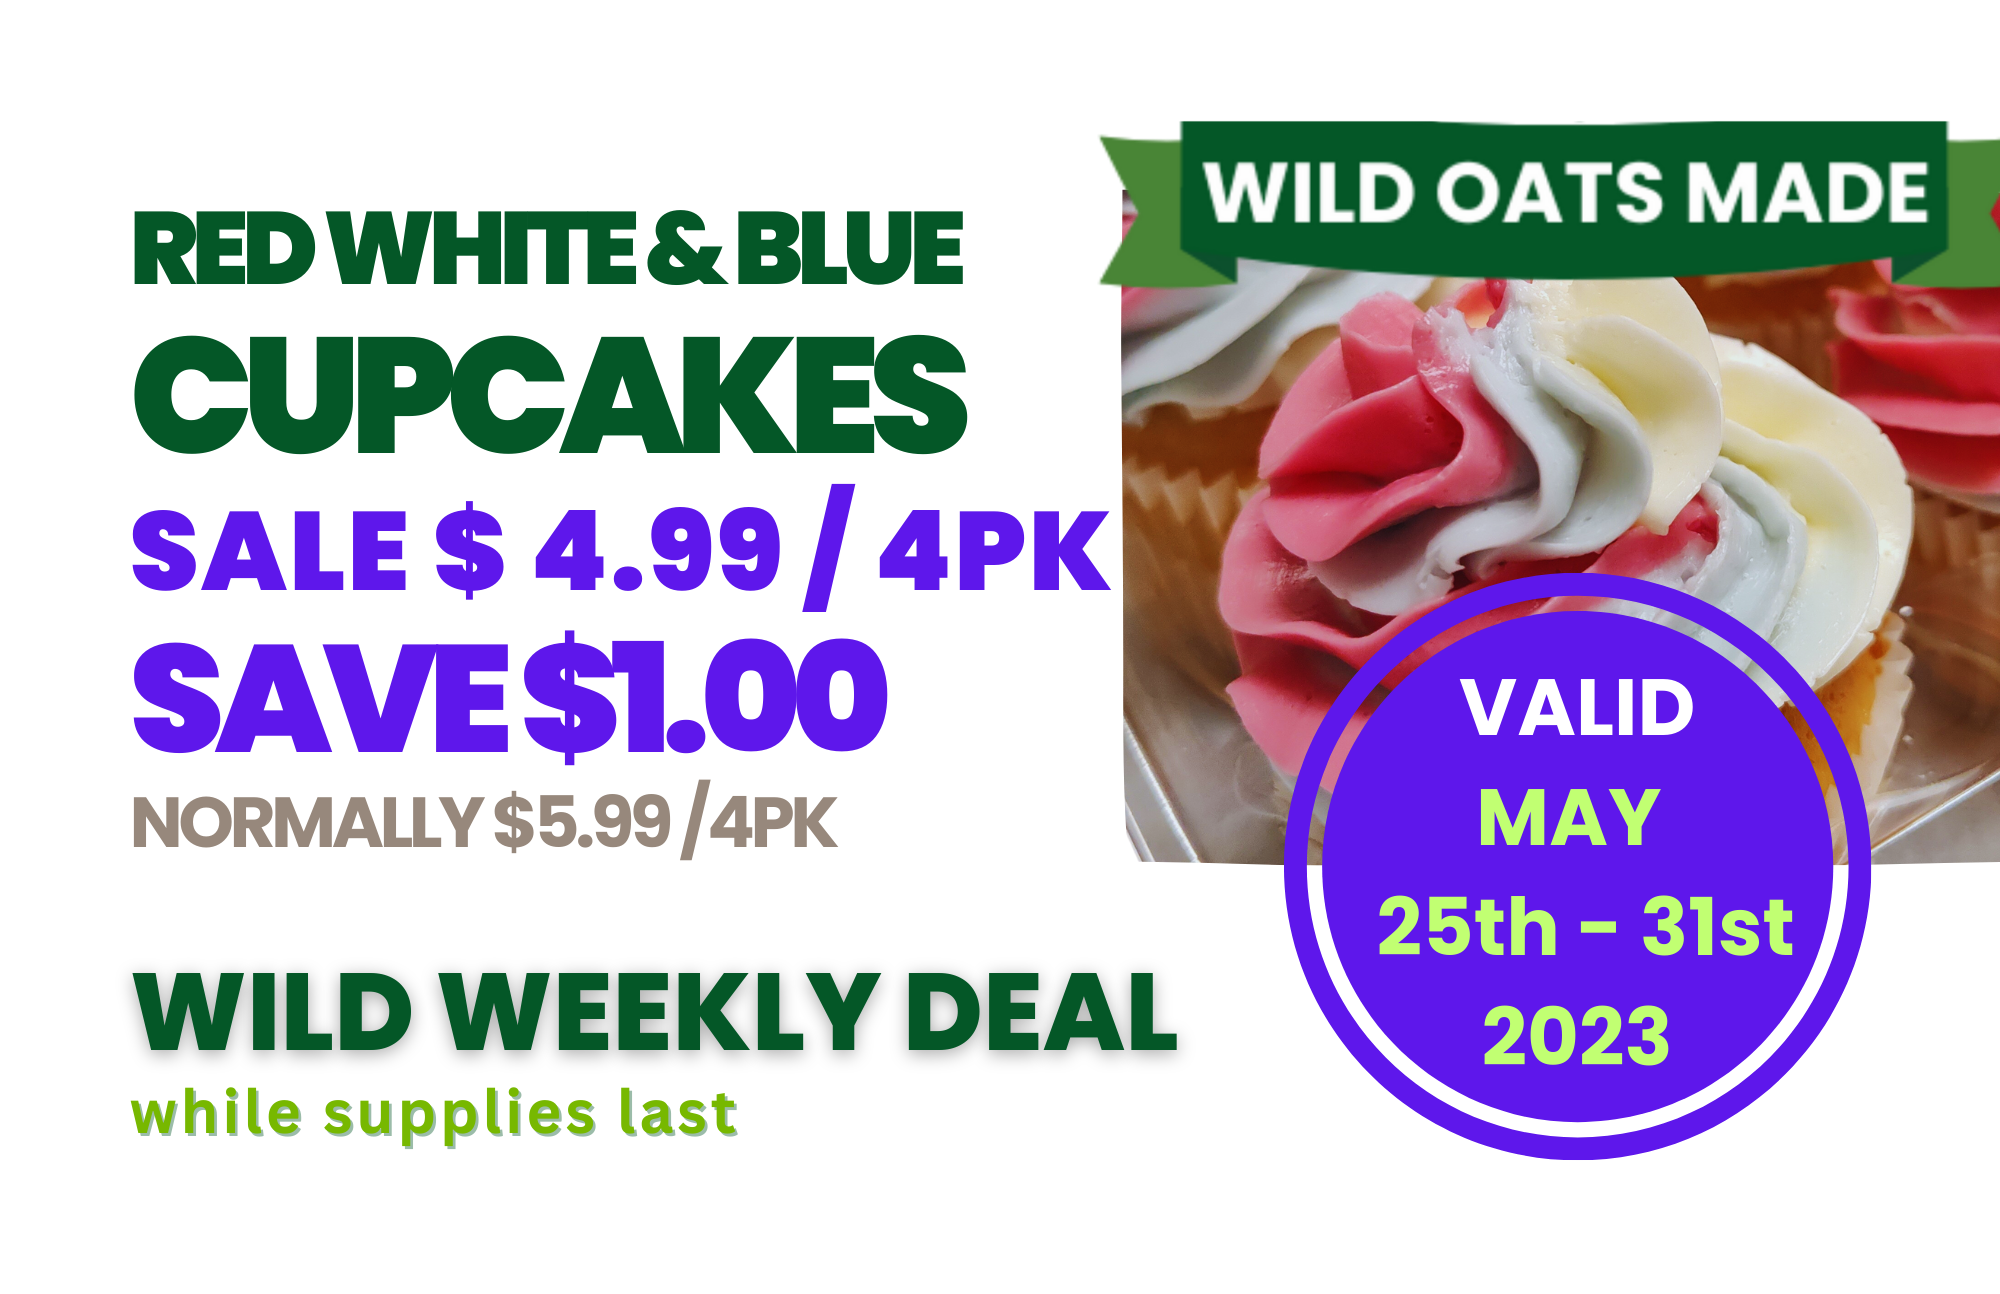 2023-0525-0531 Wild Weekend Deals Red White Blue House Made Cupcakes.png